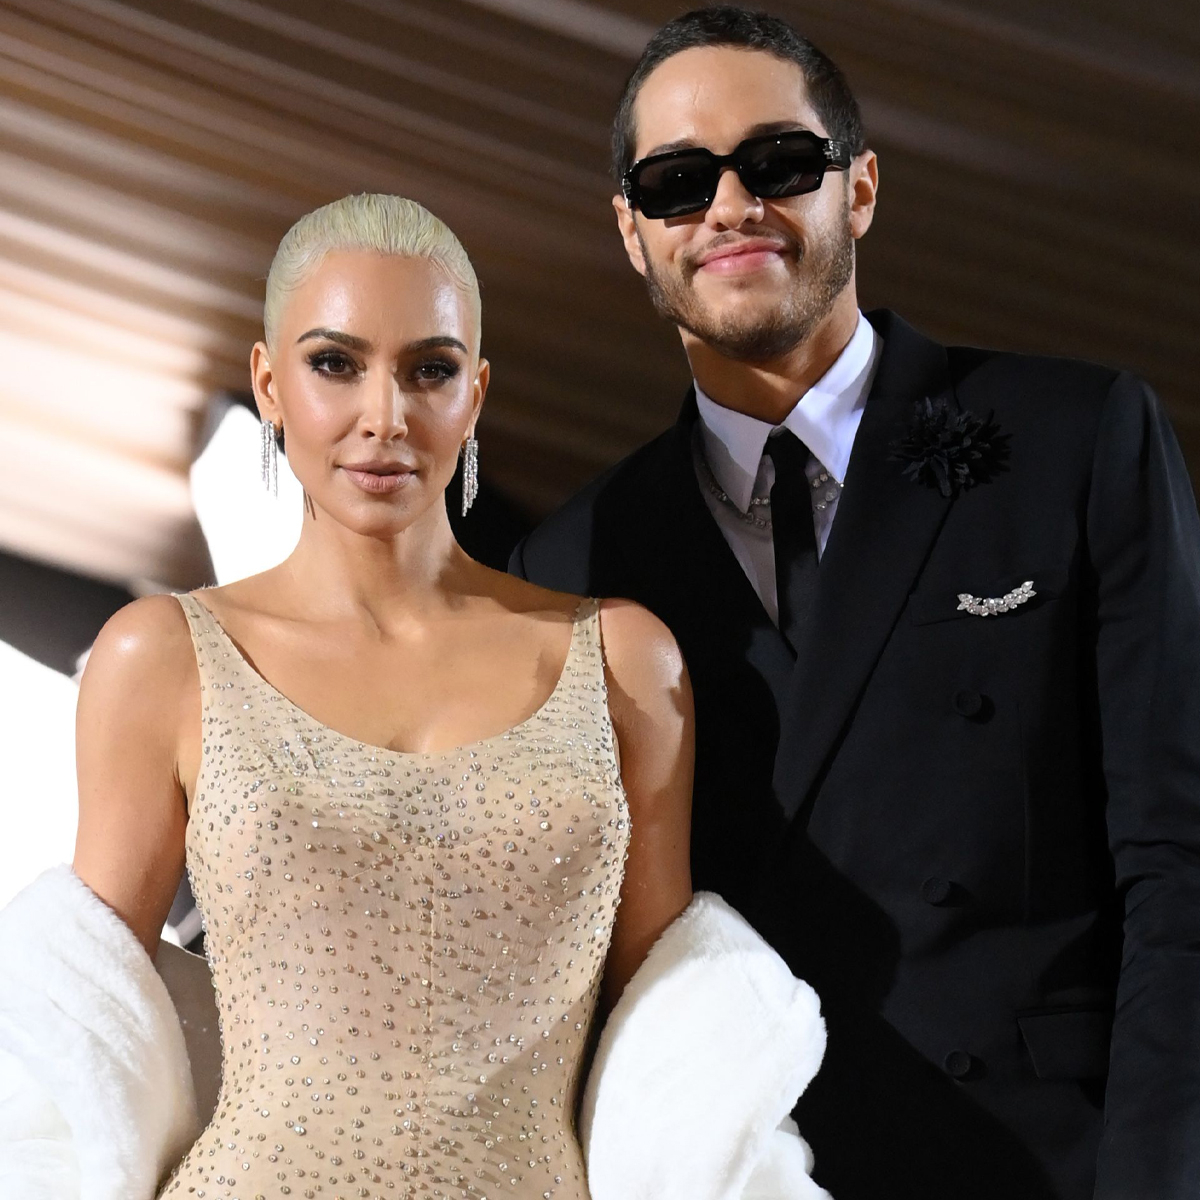 Pete Davidson Reveals Kim Kardashian’s “Excuse” to Not Give Her Number